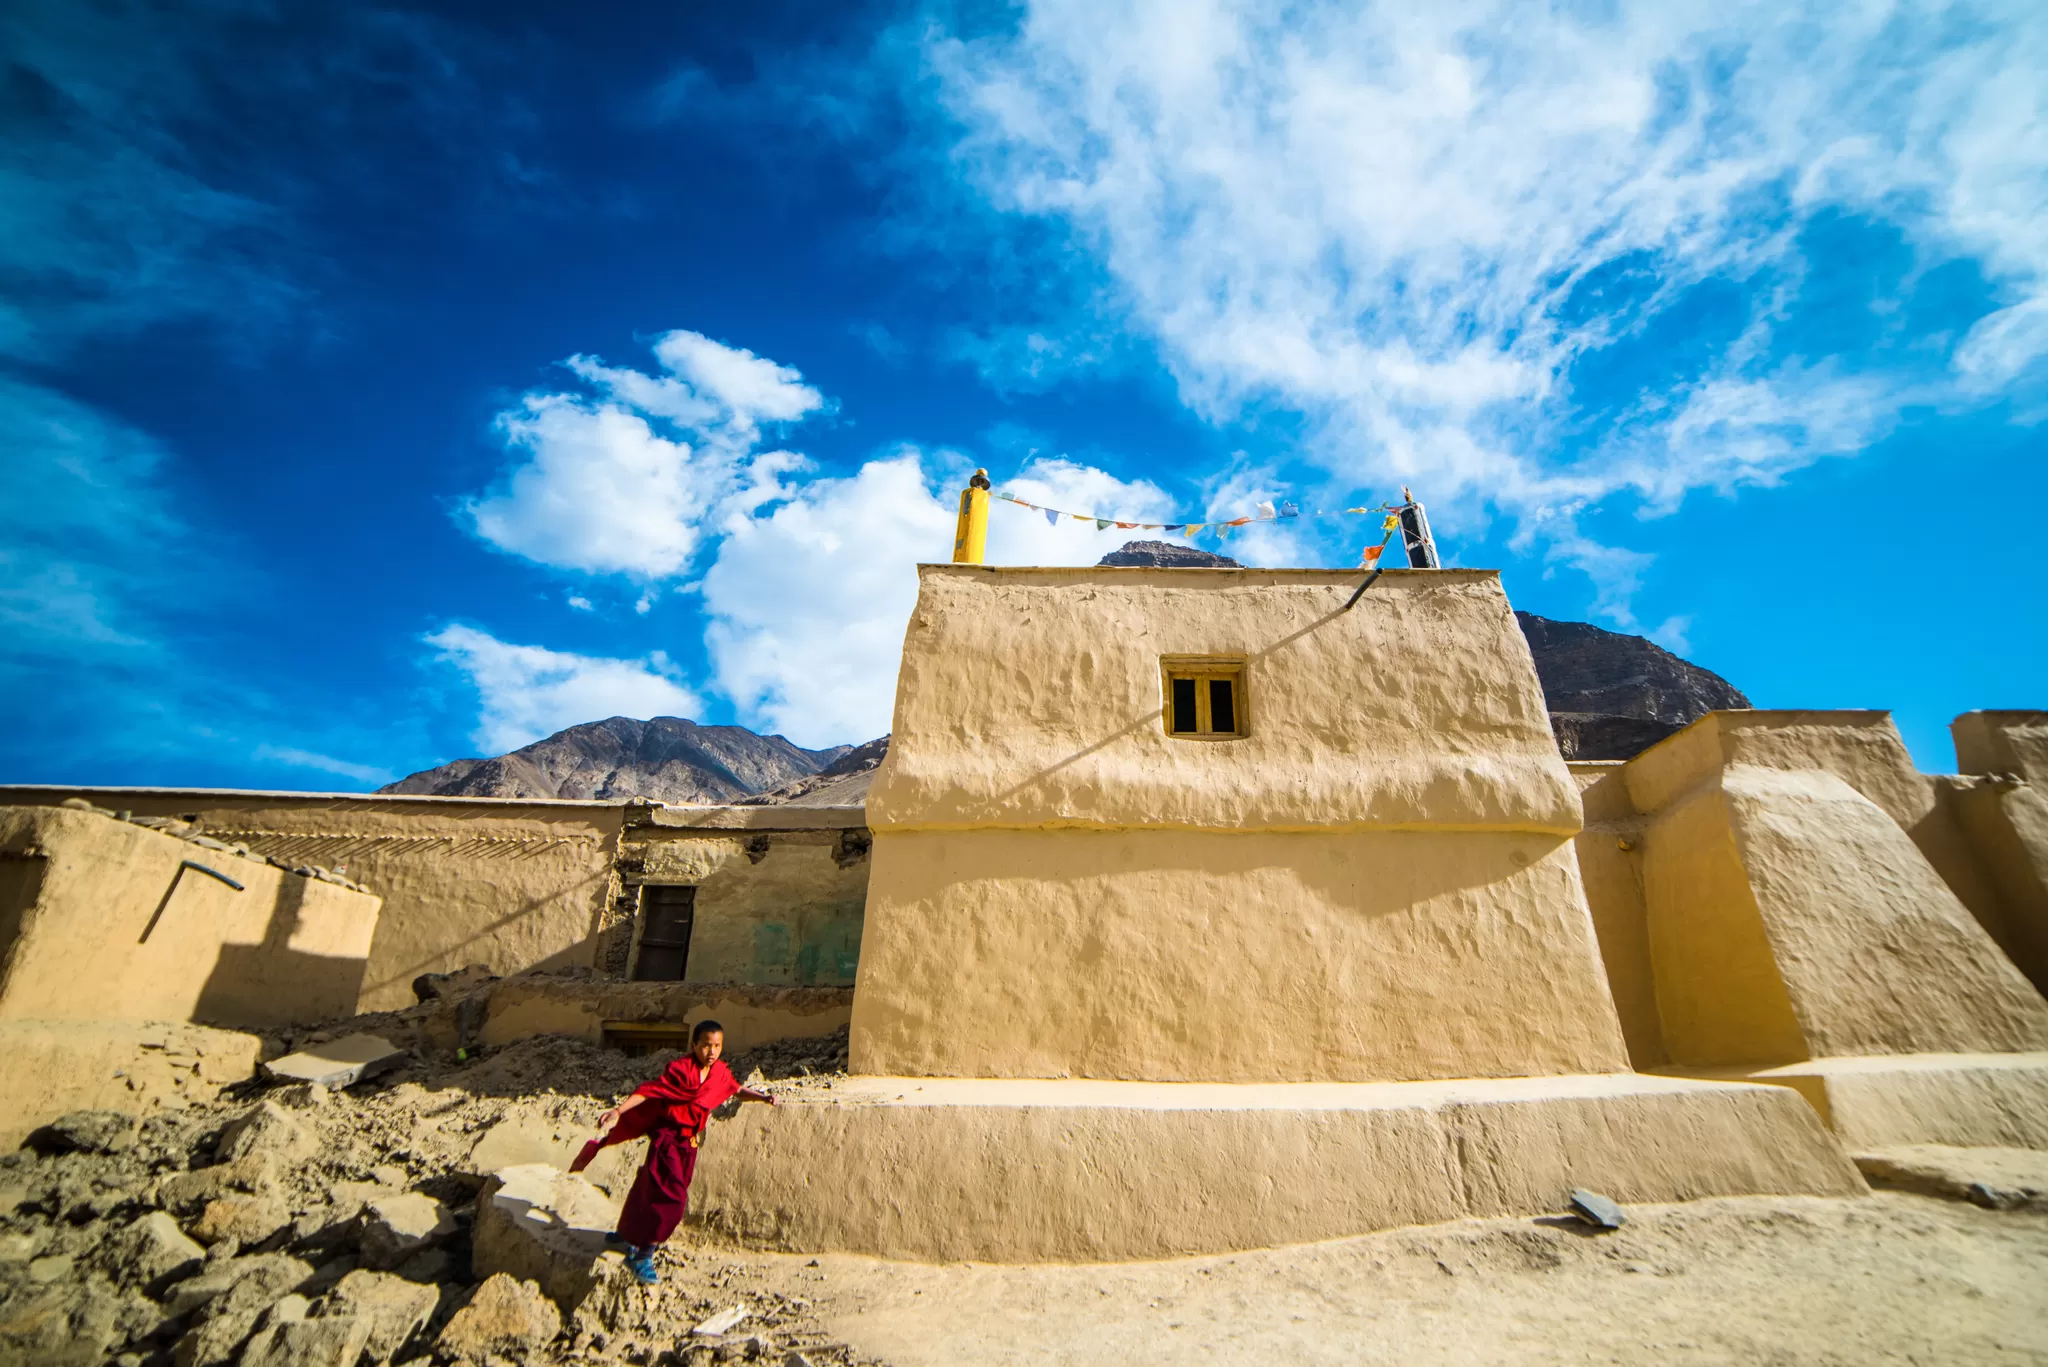 Tabo Monastery, Spiti Valley: How To Reach, Best Time & Tips